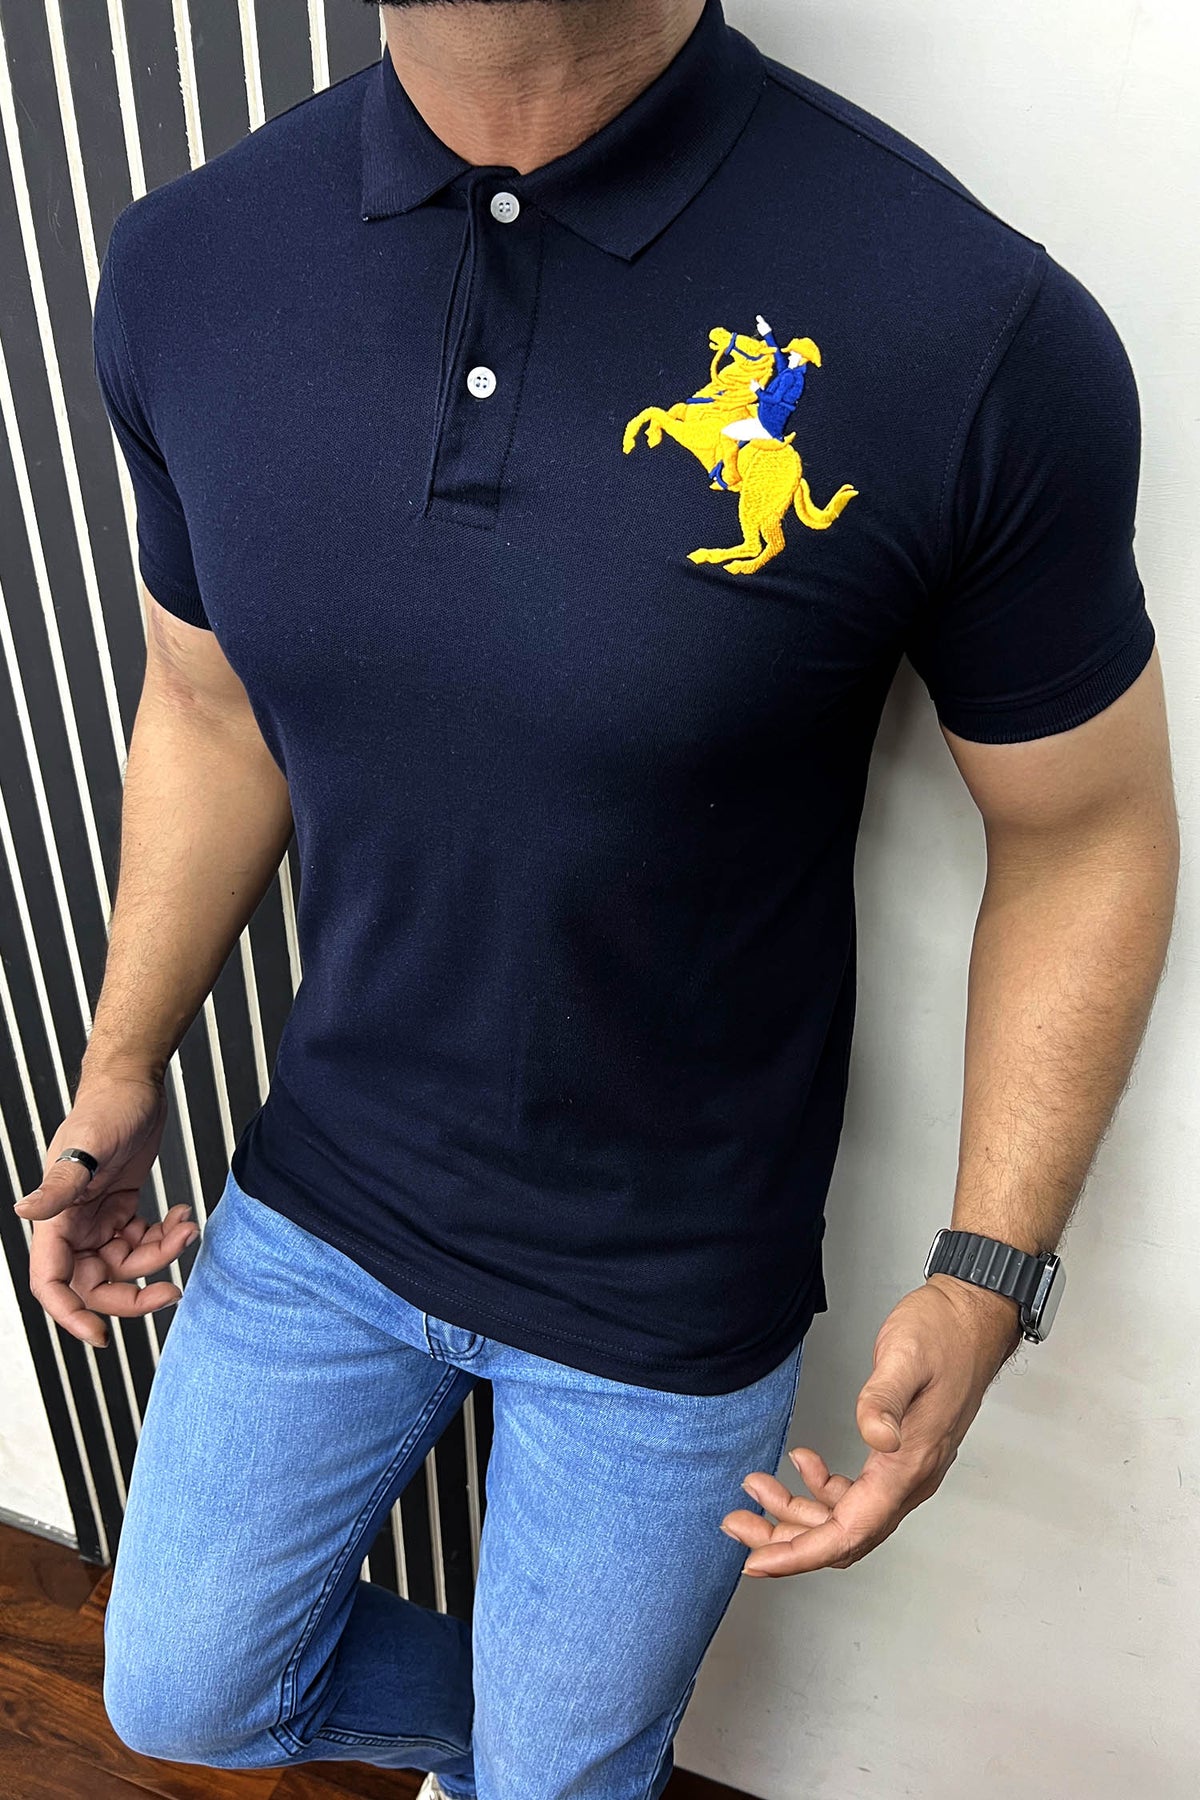 Embroided Rlph Laurn Single Pony Polo Shirt In Navy Blue